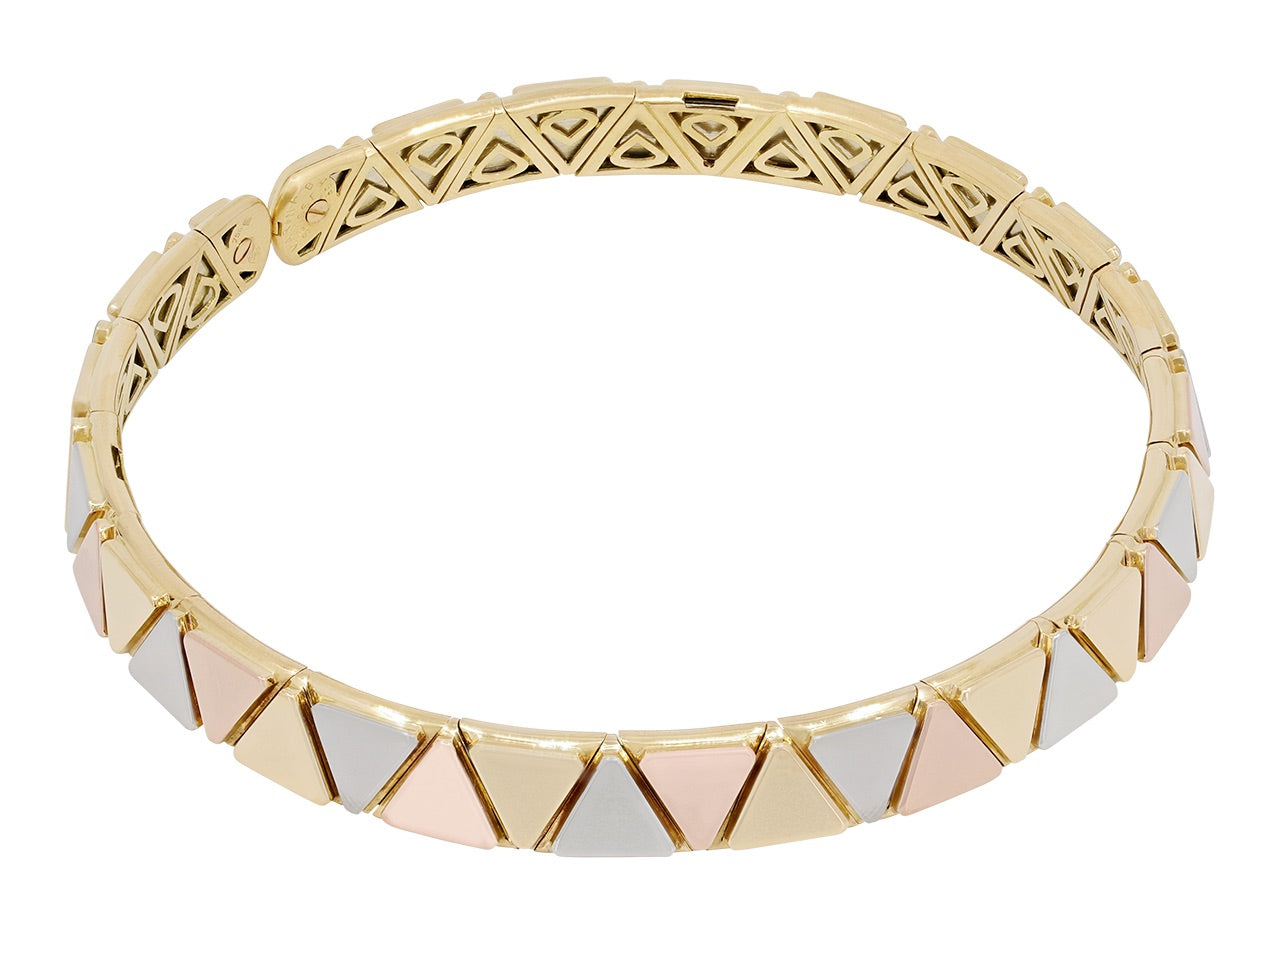 Marina B 'Trois Ors' Choker Necklace in 18K Gold